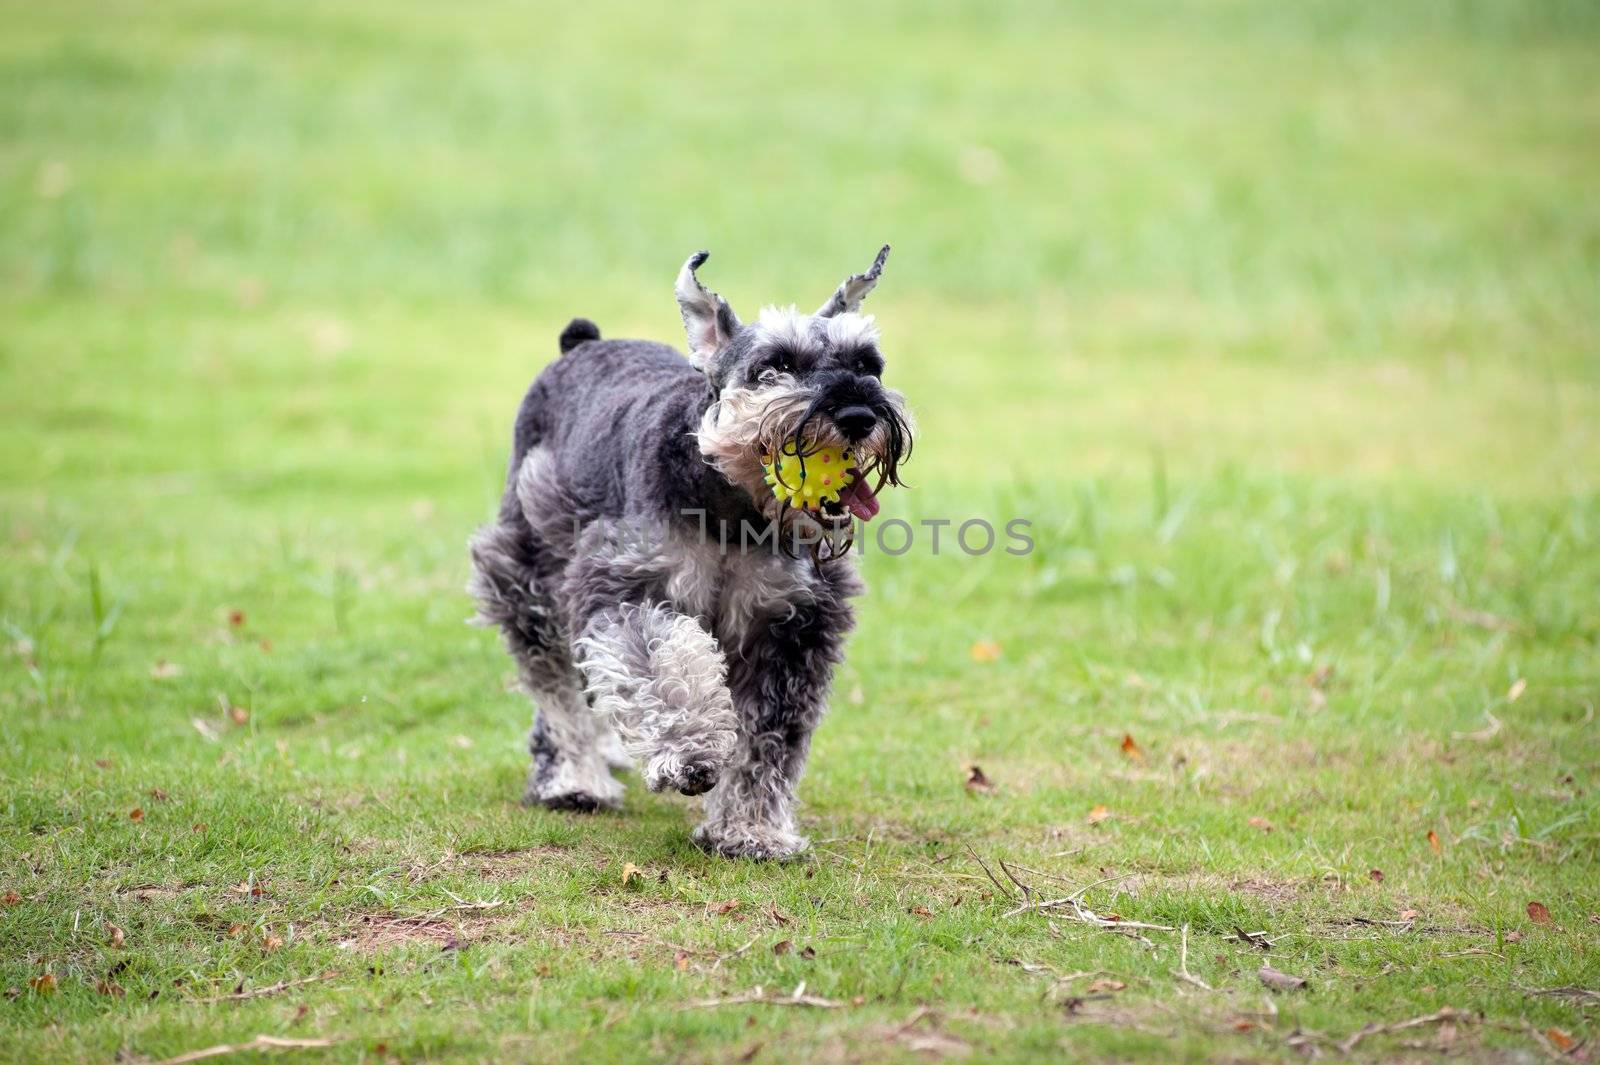 A miniature schnauzer dog holding a ball in the mouth and running on the lawn